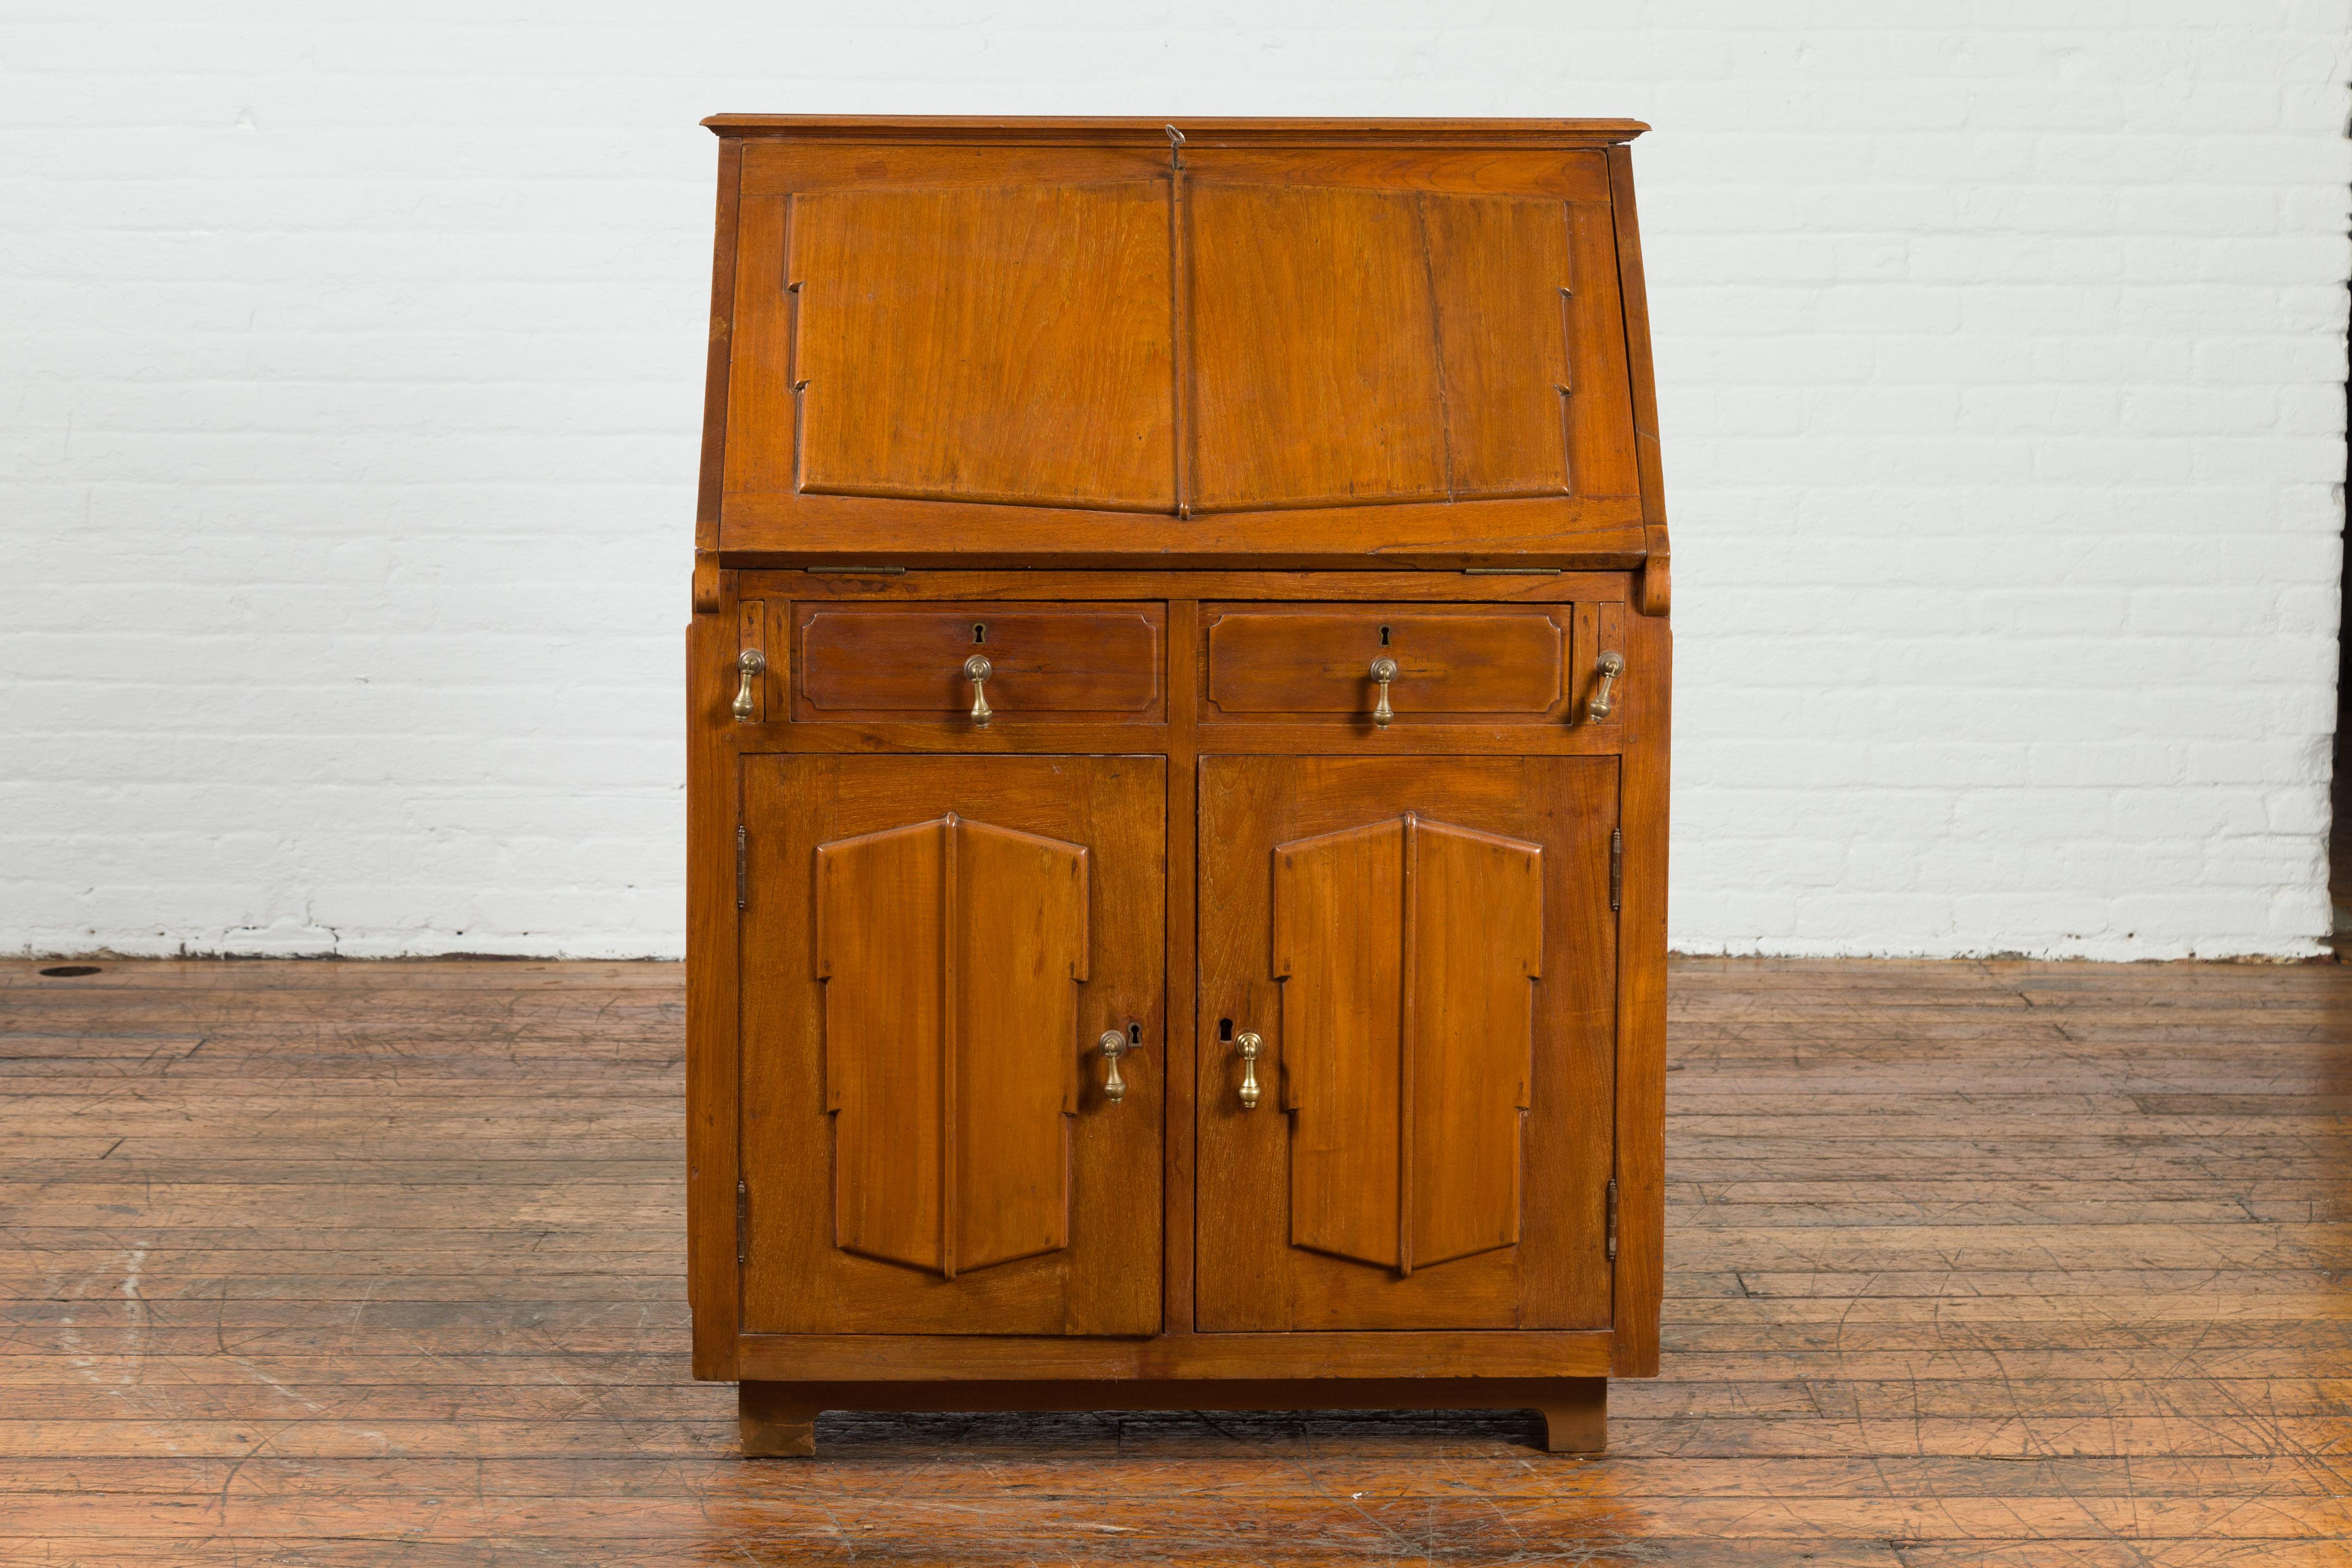 An Indonesian antique handmade slant-front desk from the 19th century, with raised panels and inner drawers. Created in Indonesia during the 19th century, this secretaire features a slant-front desk with raised panels, opening to reveal two drawers